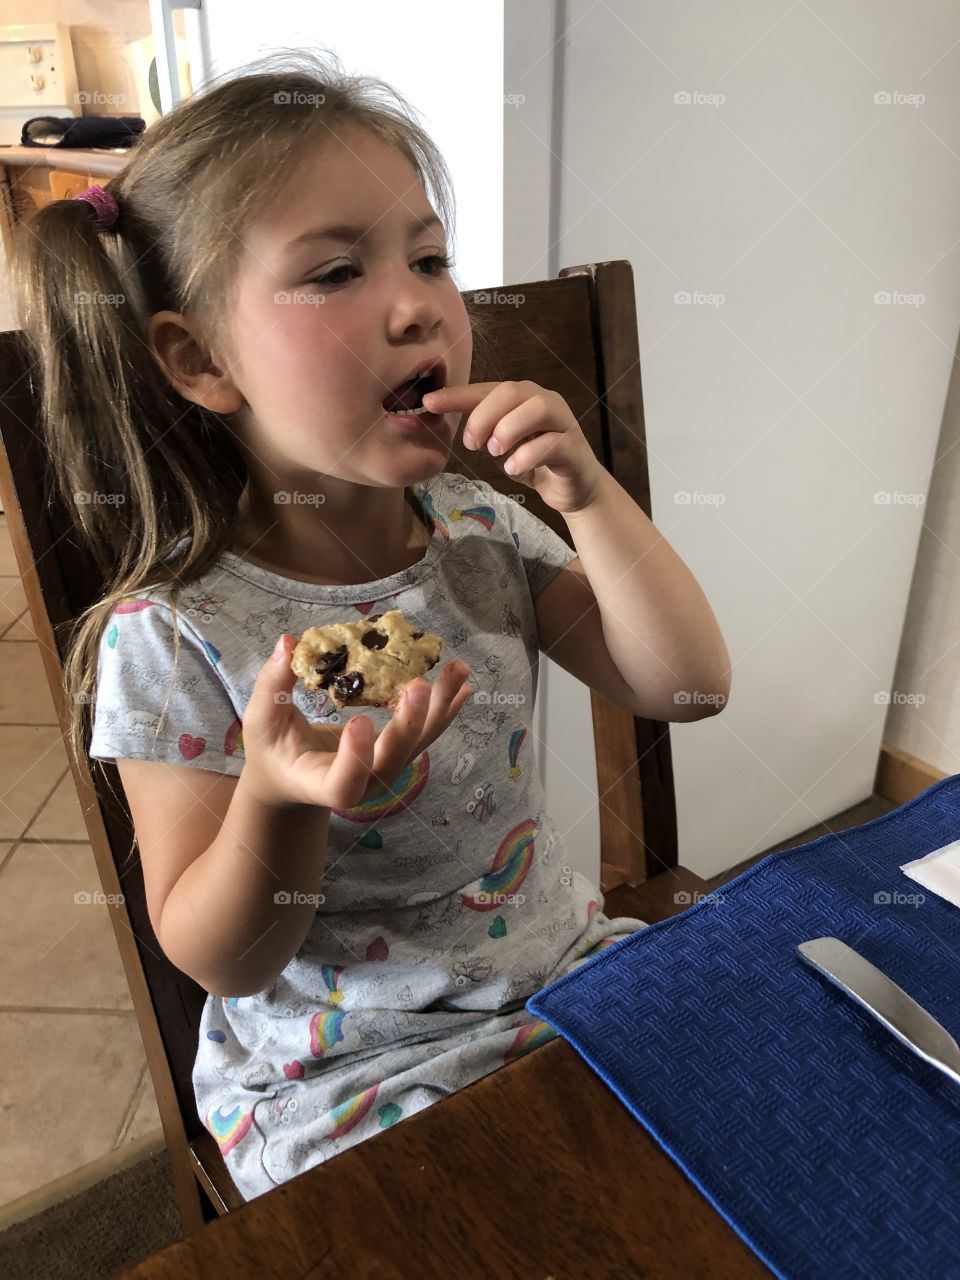 Eating A Chocolate Chip Cookie! Yummy!